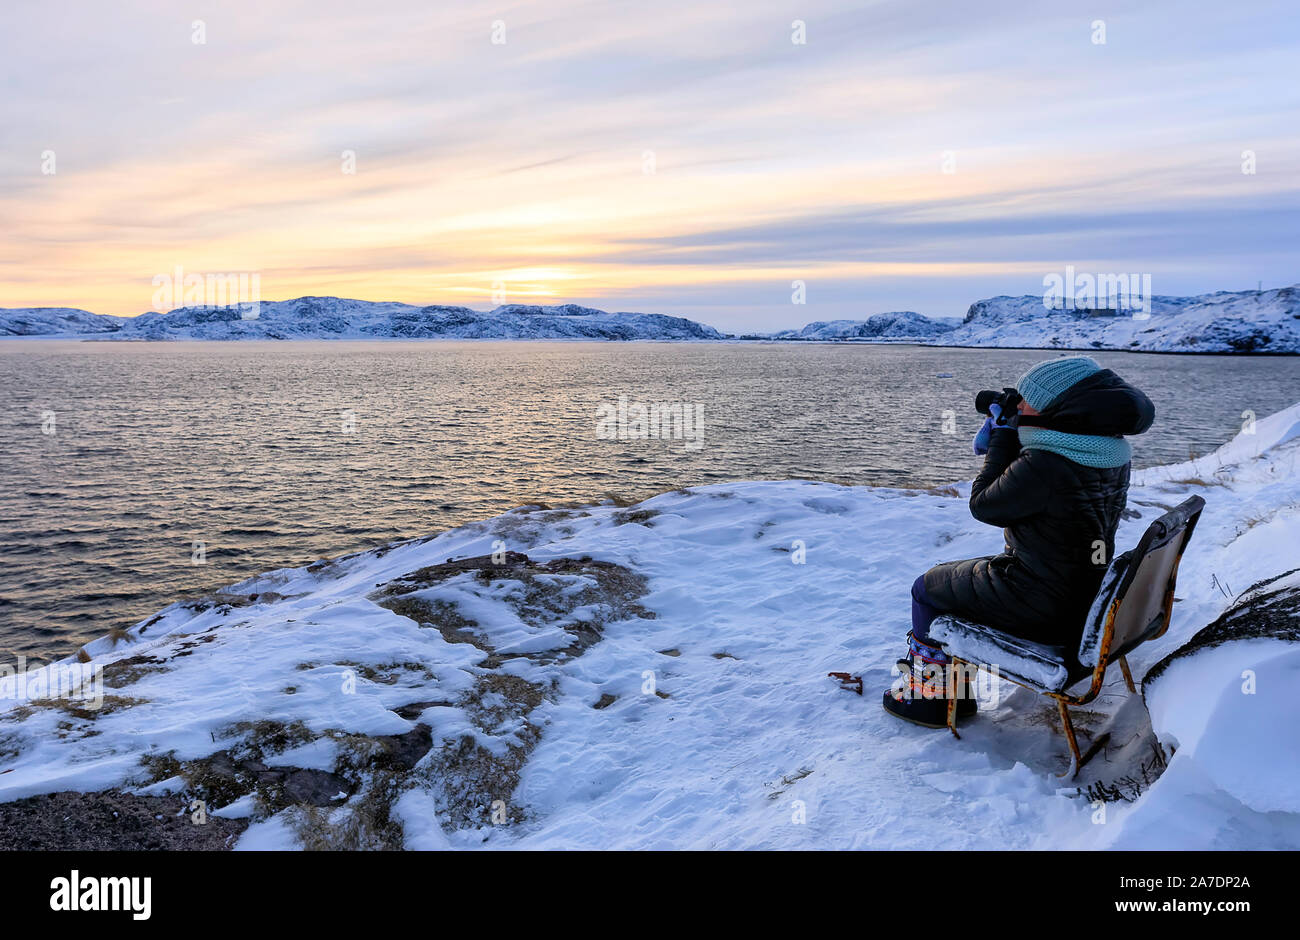 Young women traveler taking a photo on the beach of the Barents sea at sunset, Teriberka, Murmansk region, Russia. Adventure travel lifestyle concept Stock Photo